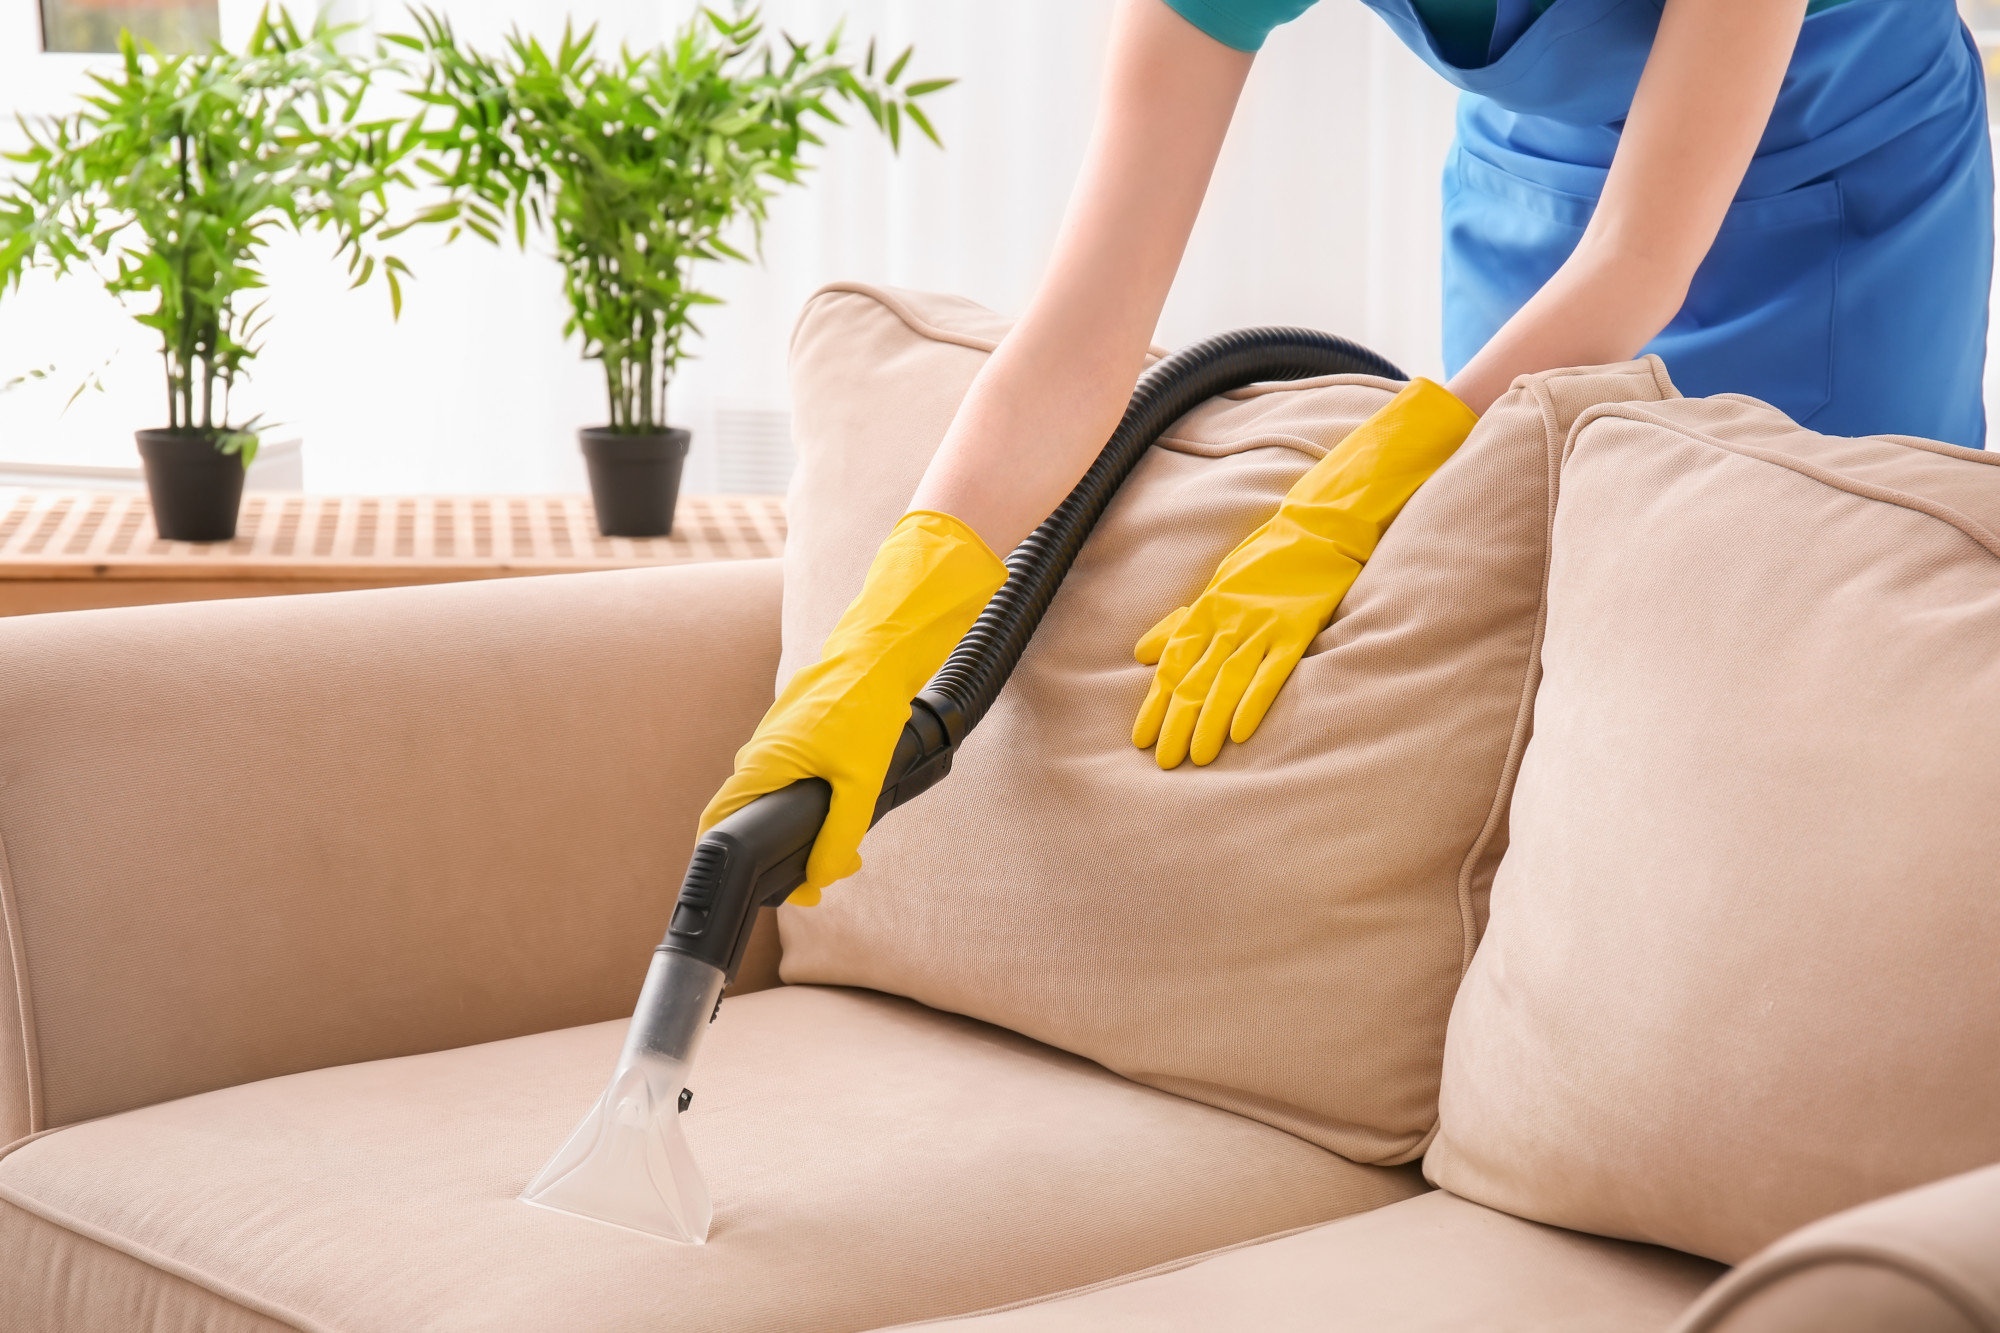 Effective upholstery cleaning tips for a woman using a vacuum to clean a couch.